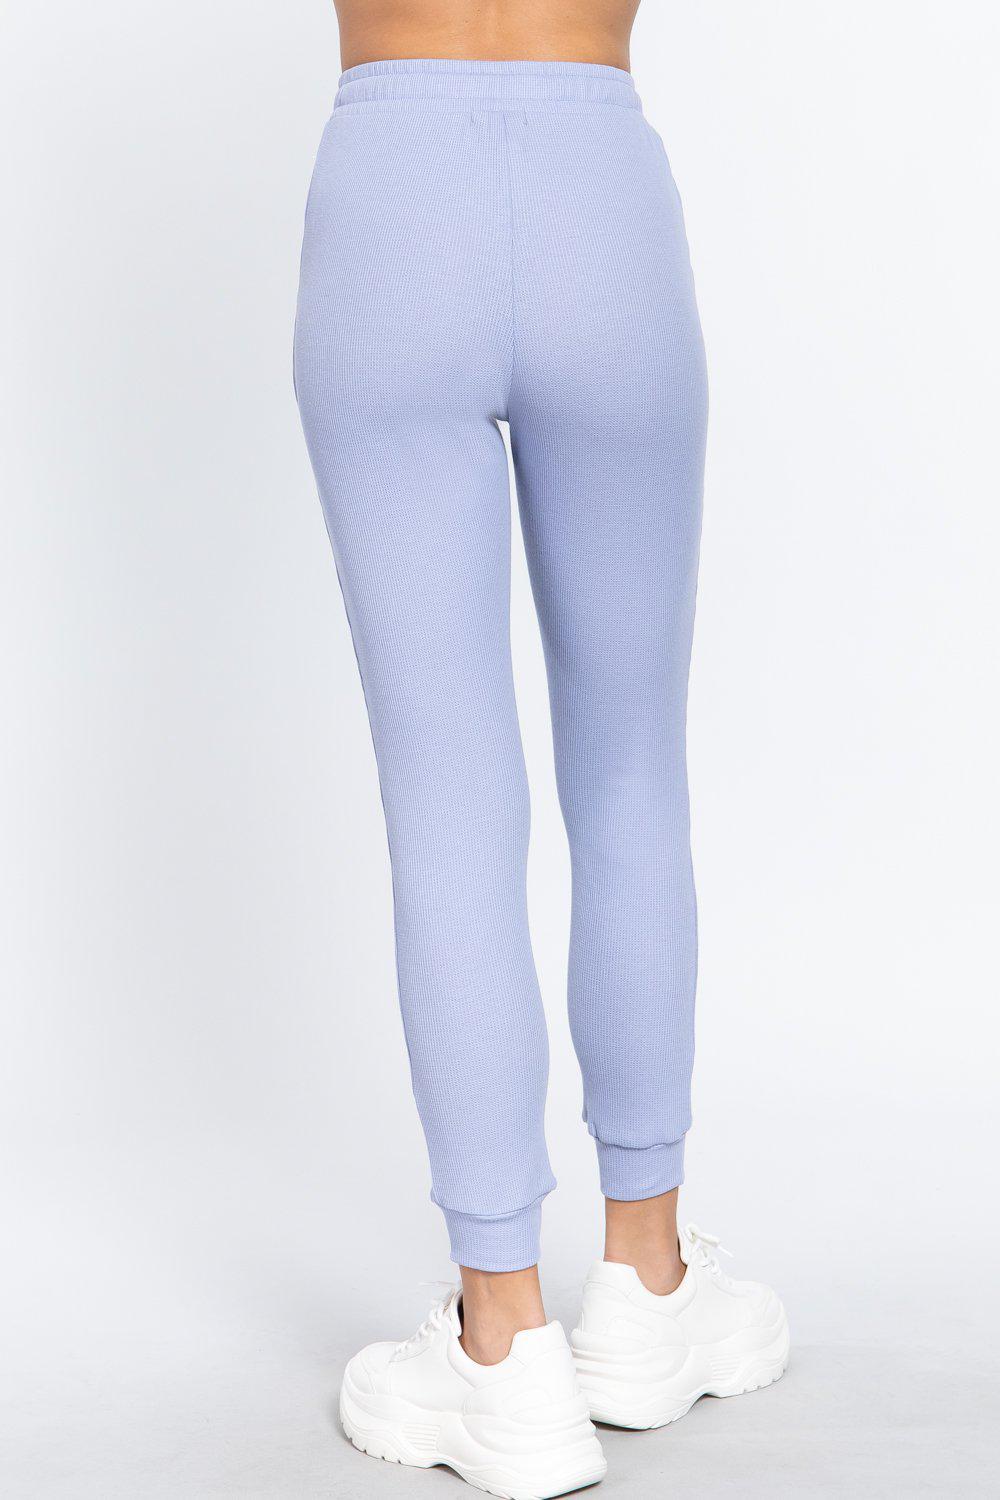 Waist Band Side Pocket Thermal Pants-[Adult]-[Female]-Blue Zone Planet